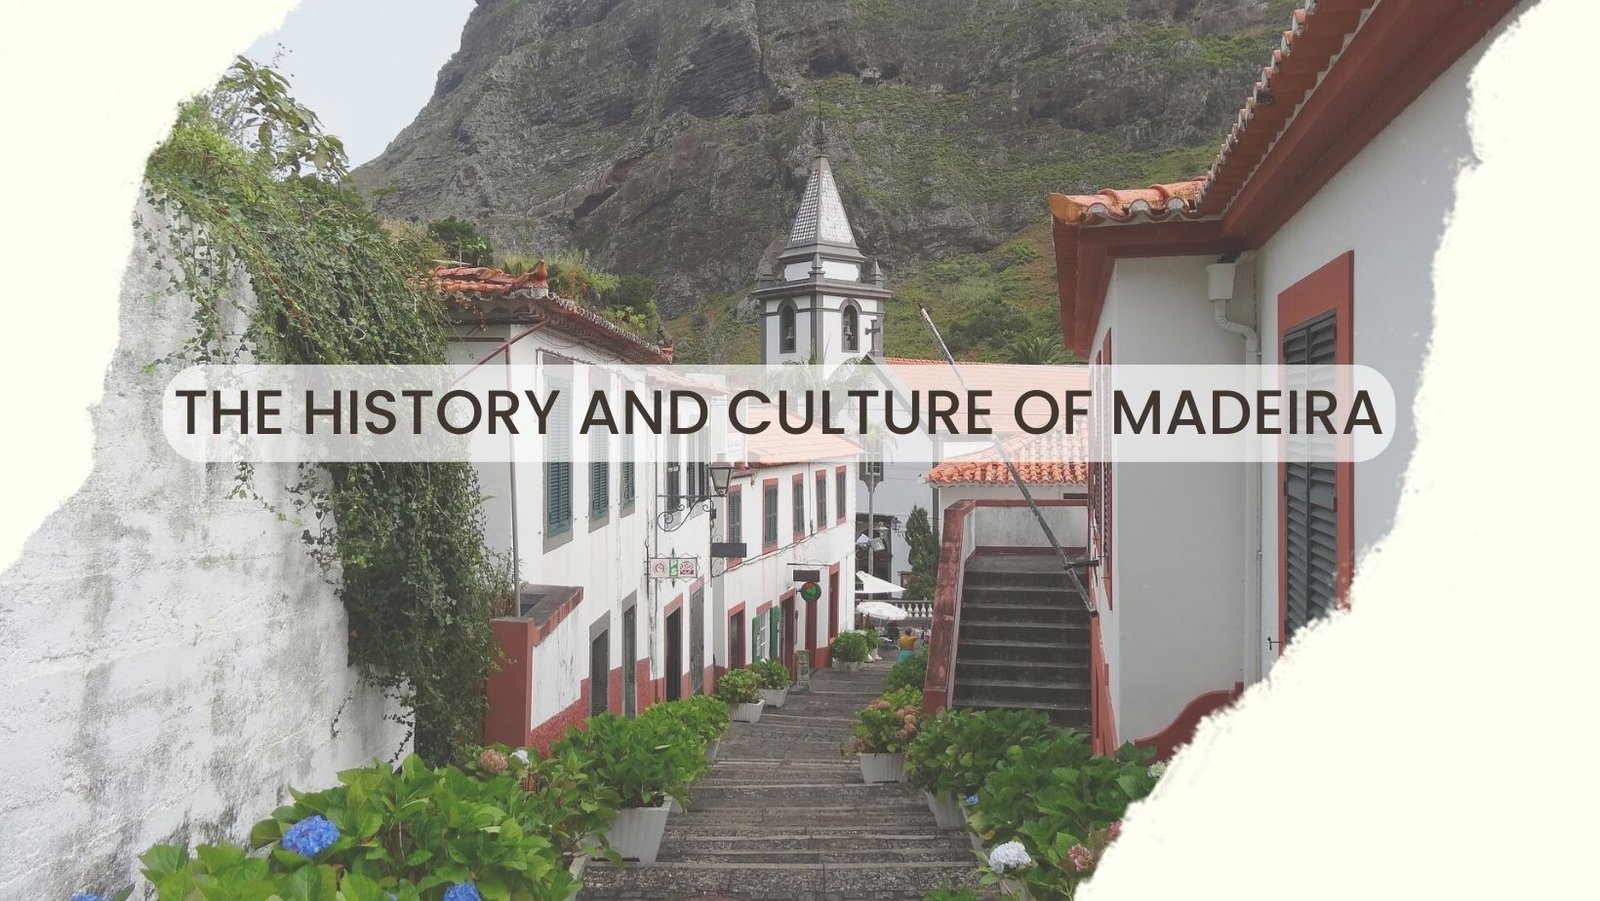 The History and Culture of Madeira